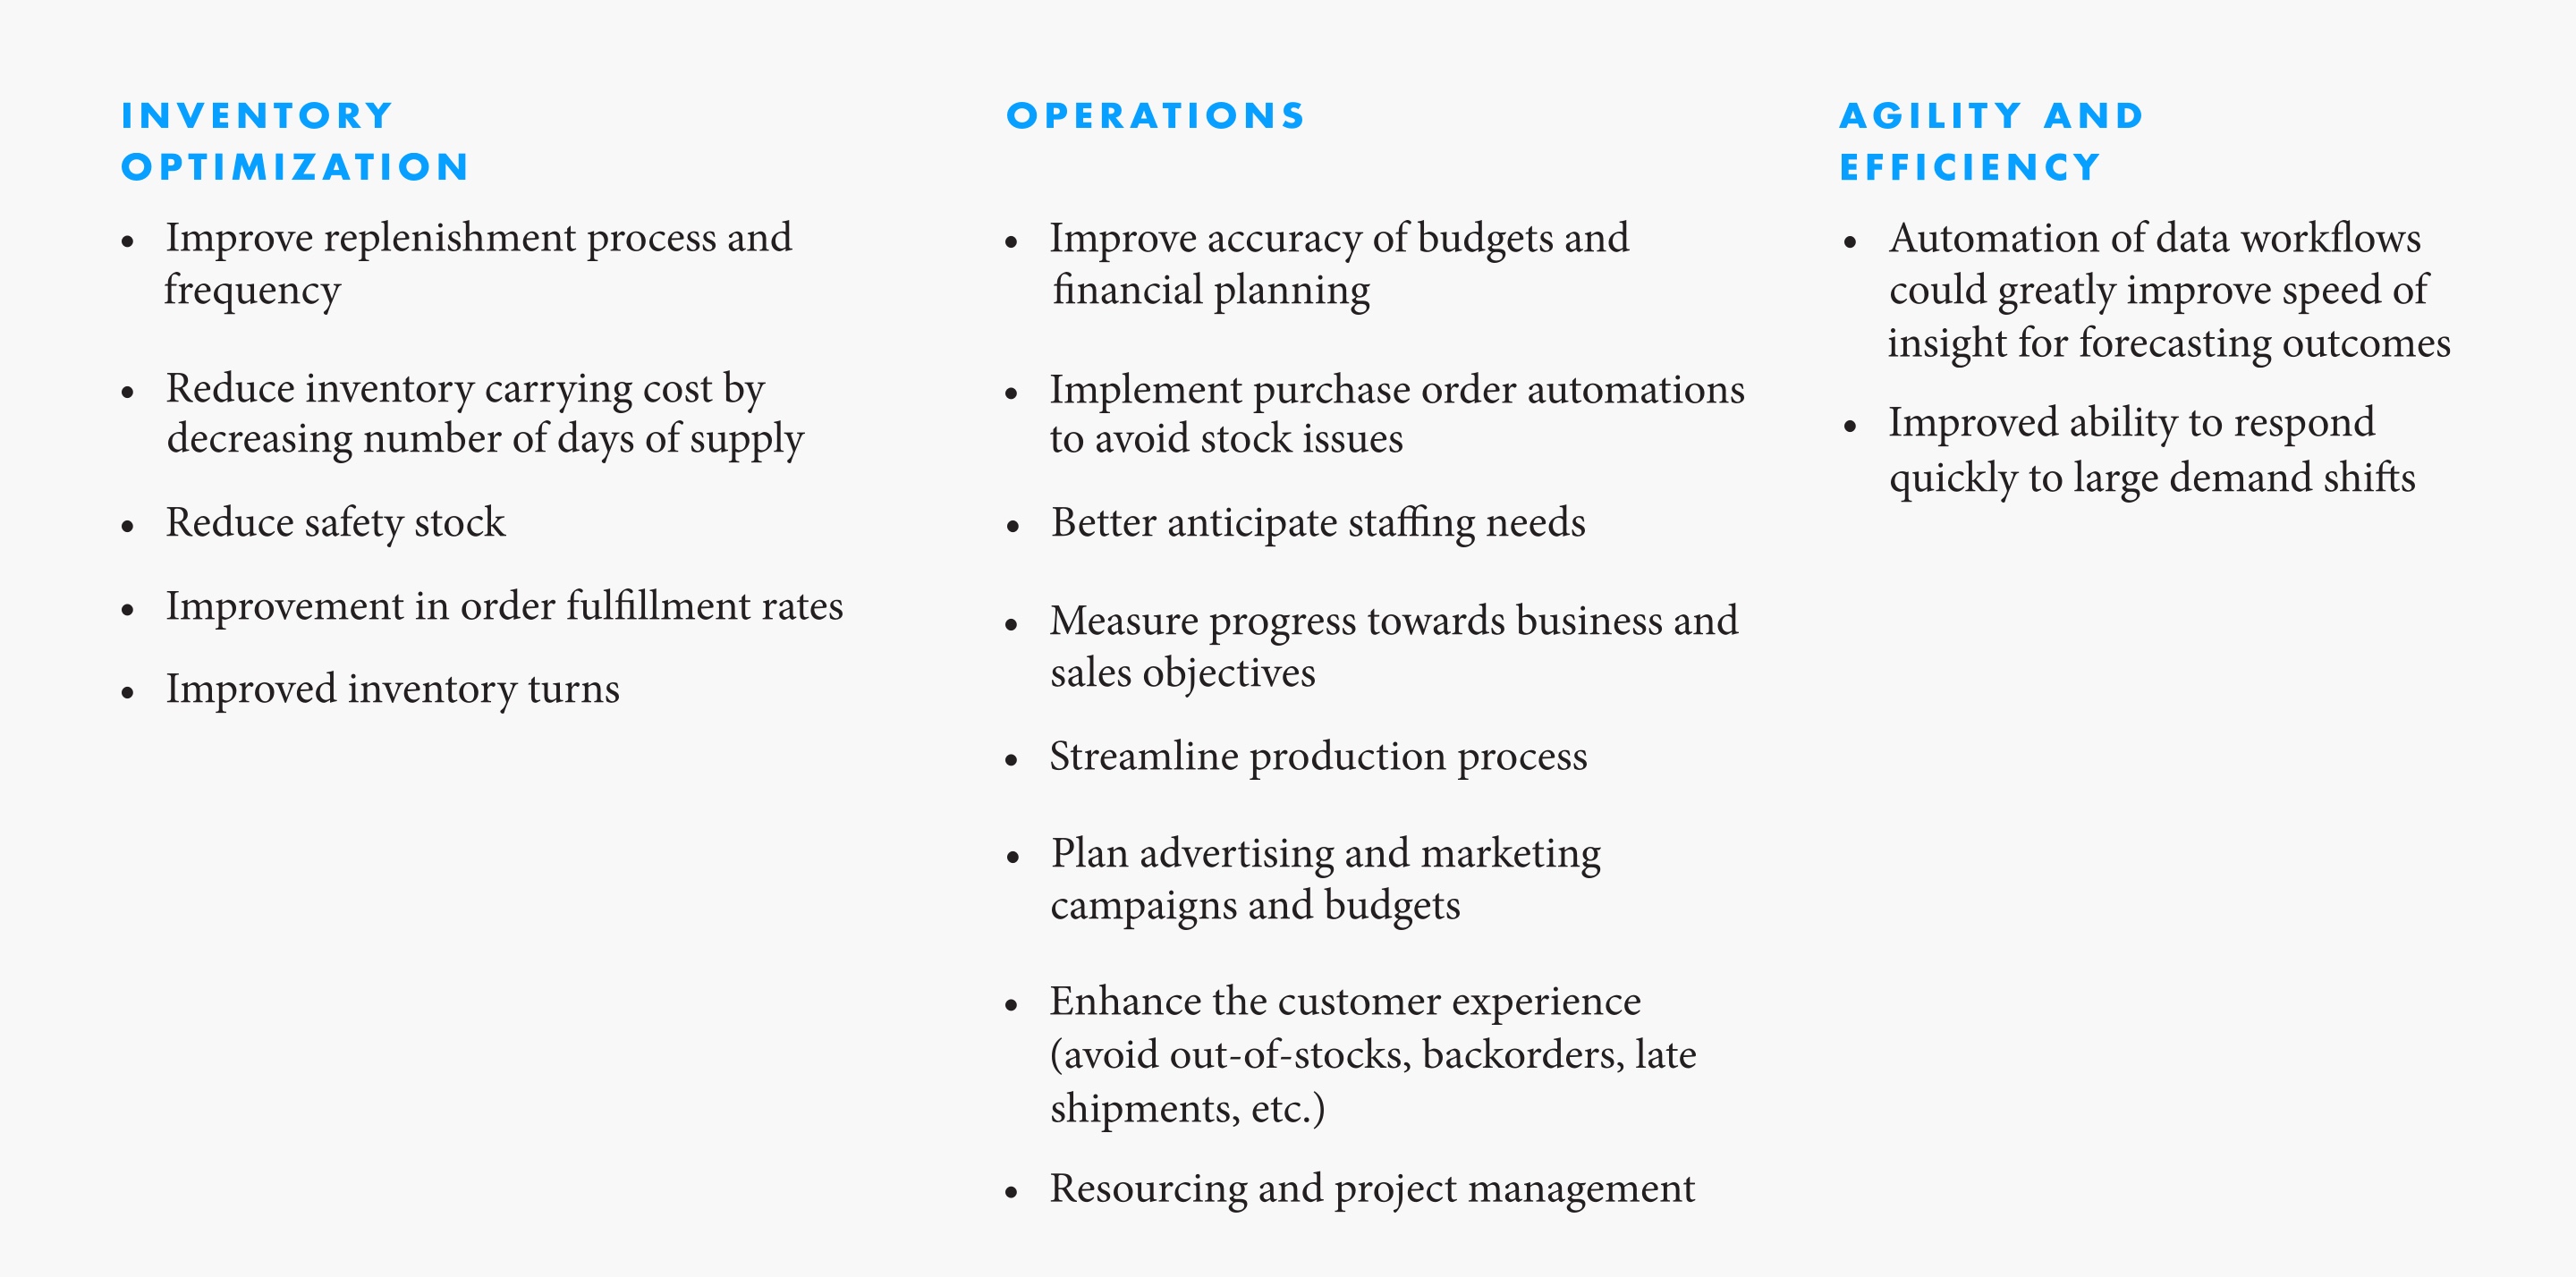 Inventory Optimization: - Improve replenishment process and frequency  - Reduce inventory carrying cost by decreasing number of days of supply  - Reduce safety stock - Improvement in order fulfillment rates - Improved inventory turns.  Operations - Improve accuracy of budgets and financial planning - Implement purchase order automations to avoid stock issues - Better anticipate staffing needs - Measure progress towards business and sales objectives - Streamline production process - Plan advertising and marketing campaigns and budgets - Enhance the customer experience (avoid out-of-stocks, backorders, late shipments, etc.) Resourcing and project management. Agility and Efficiency - Automation of data workflows could greatly improve speed to insight for forecasting outcomes - Improved ability to respond quickly to large demand shifts